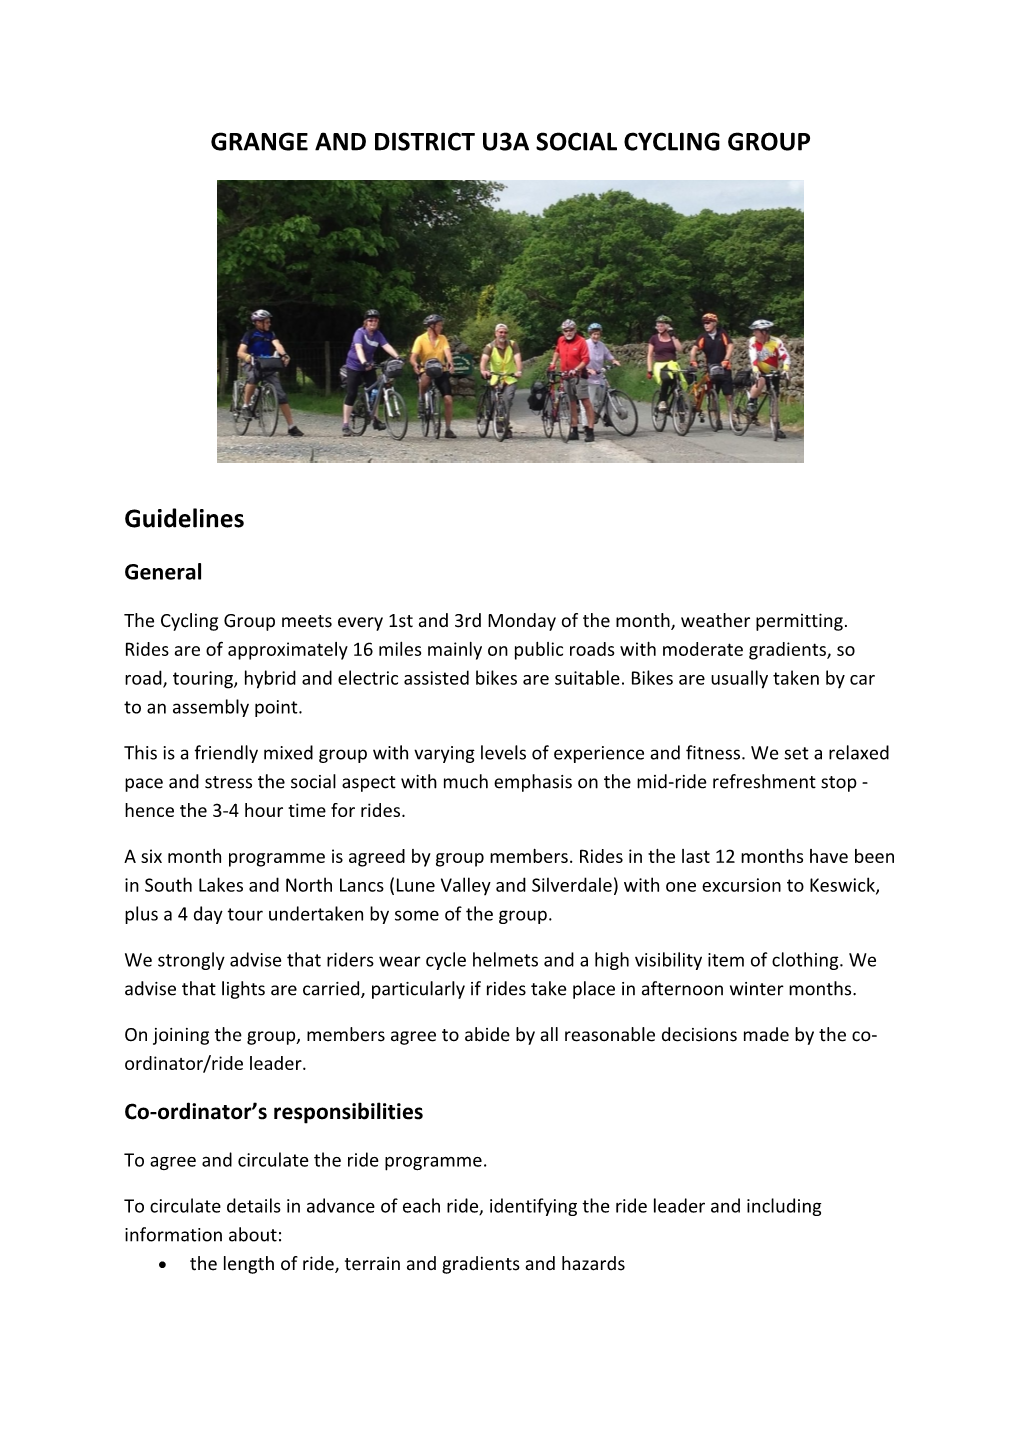 Grange and District U3a Social Cycling Group